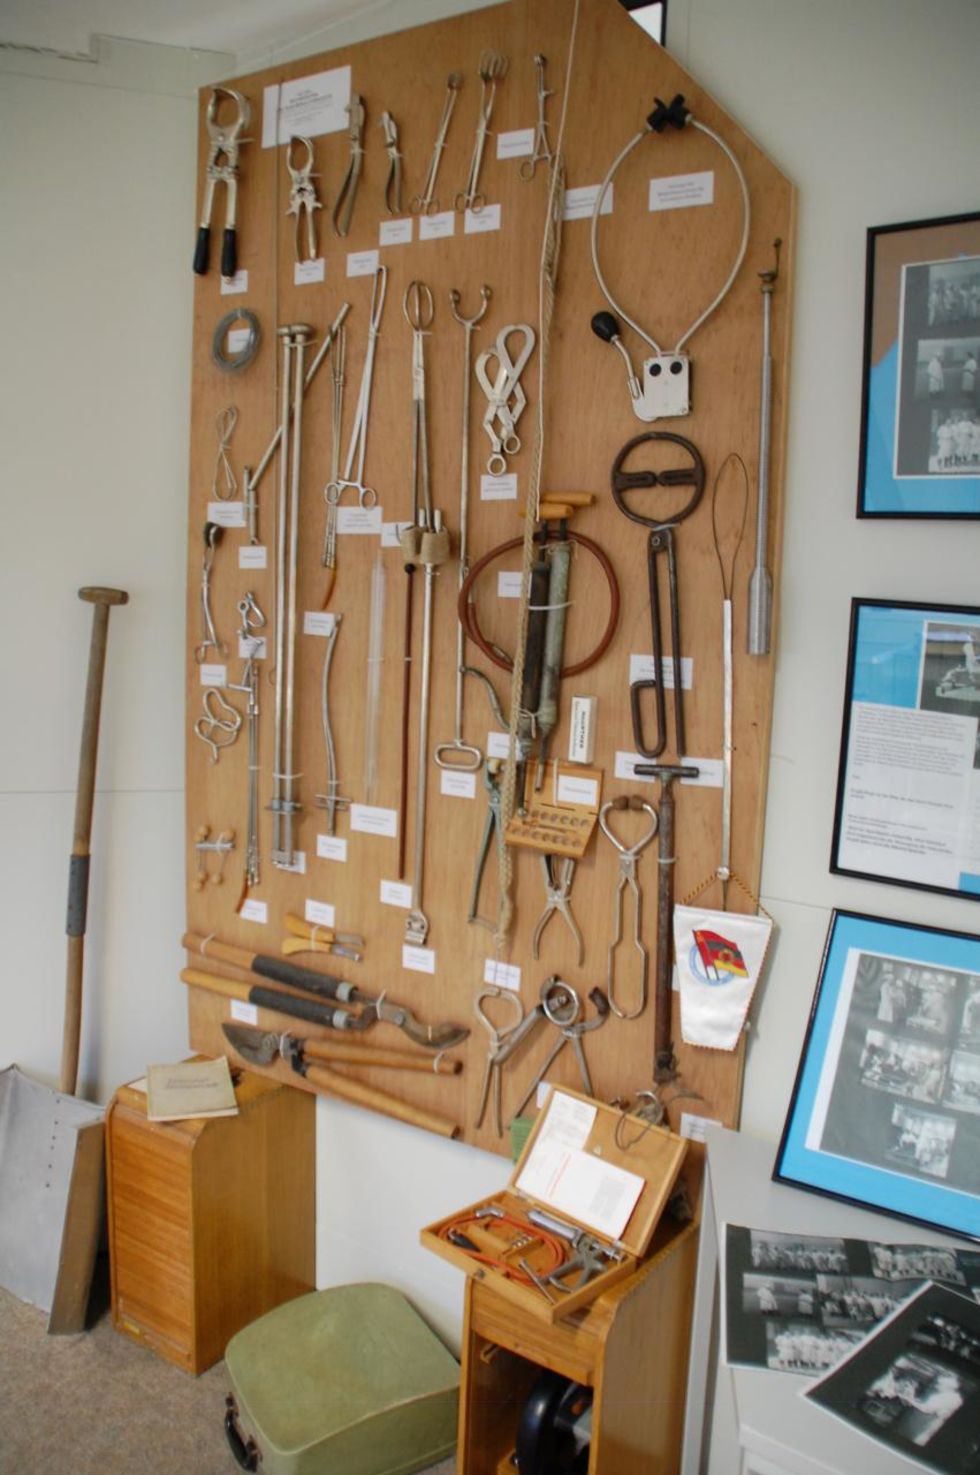 Display wall with veterinary instruments